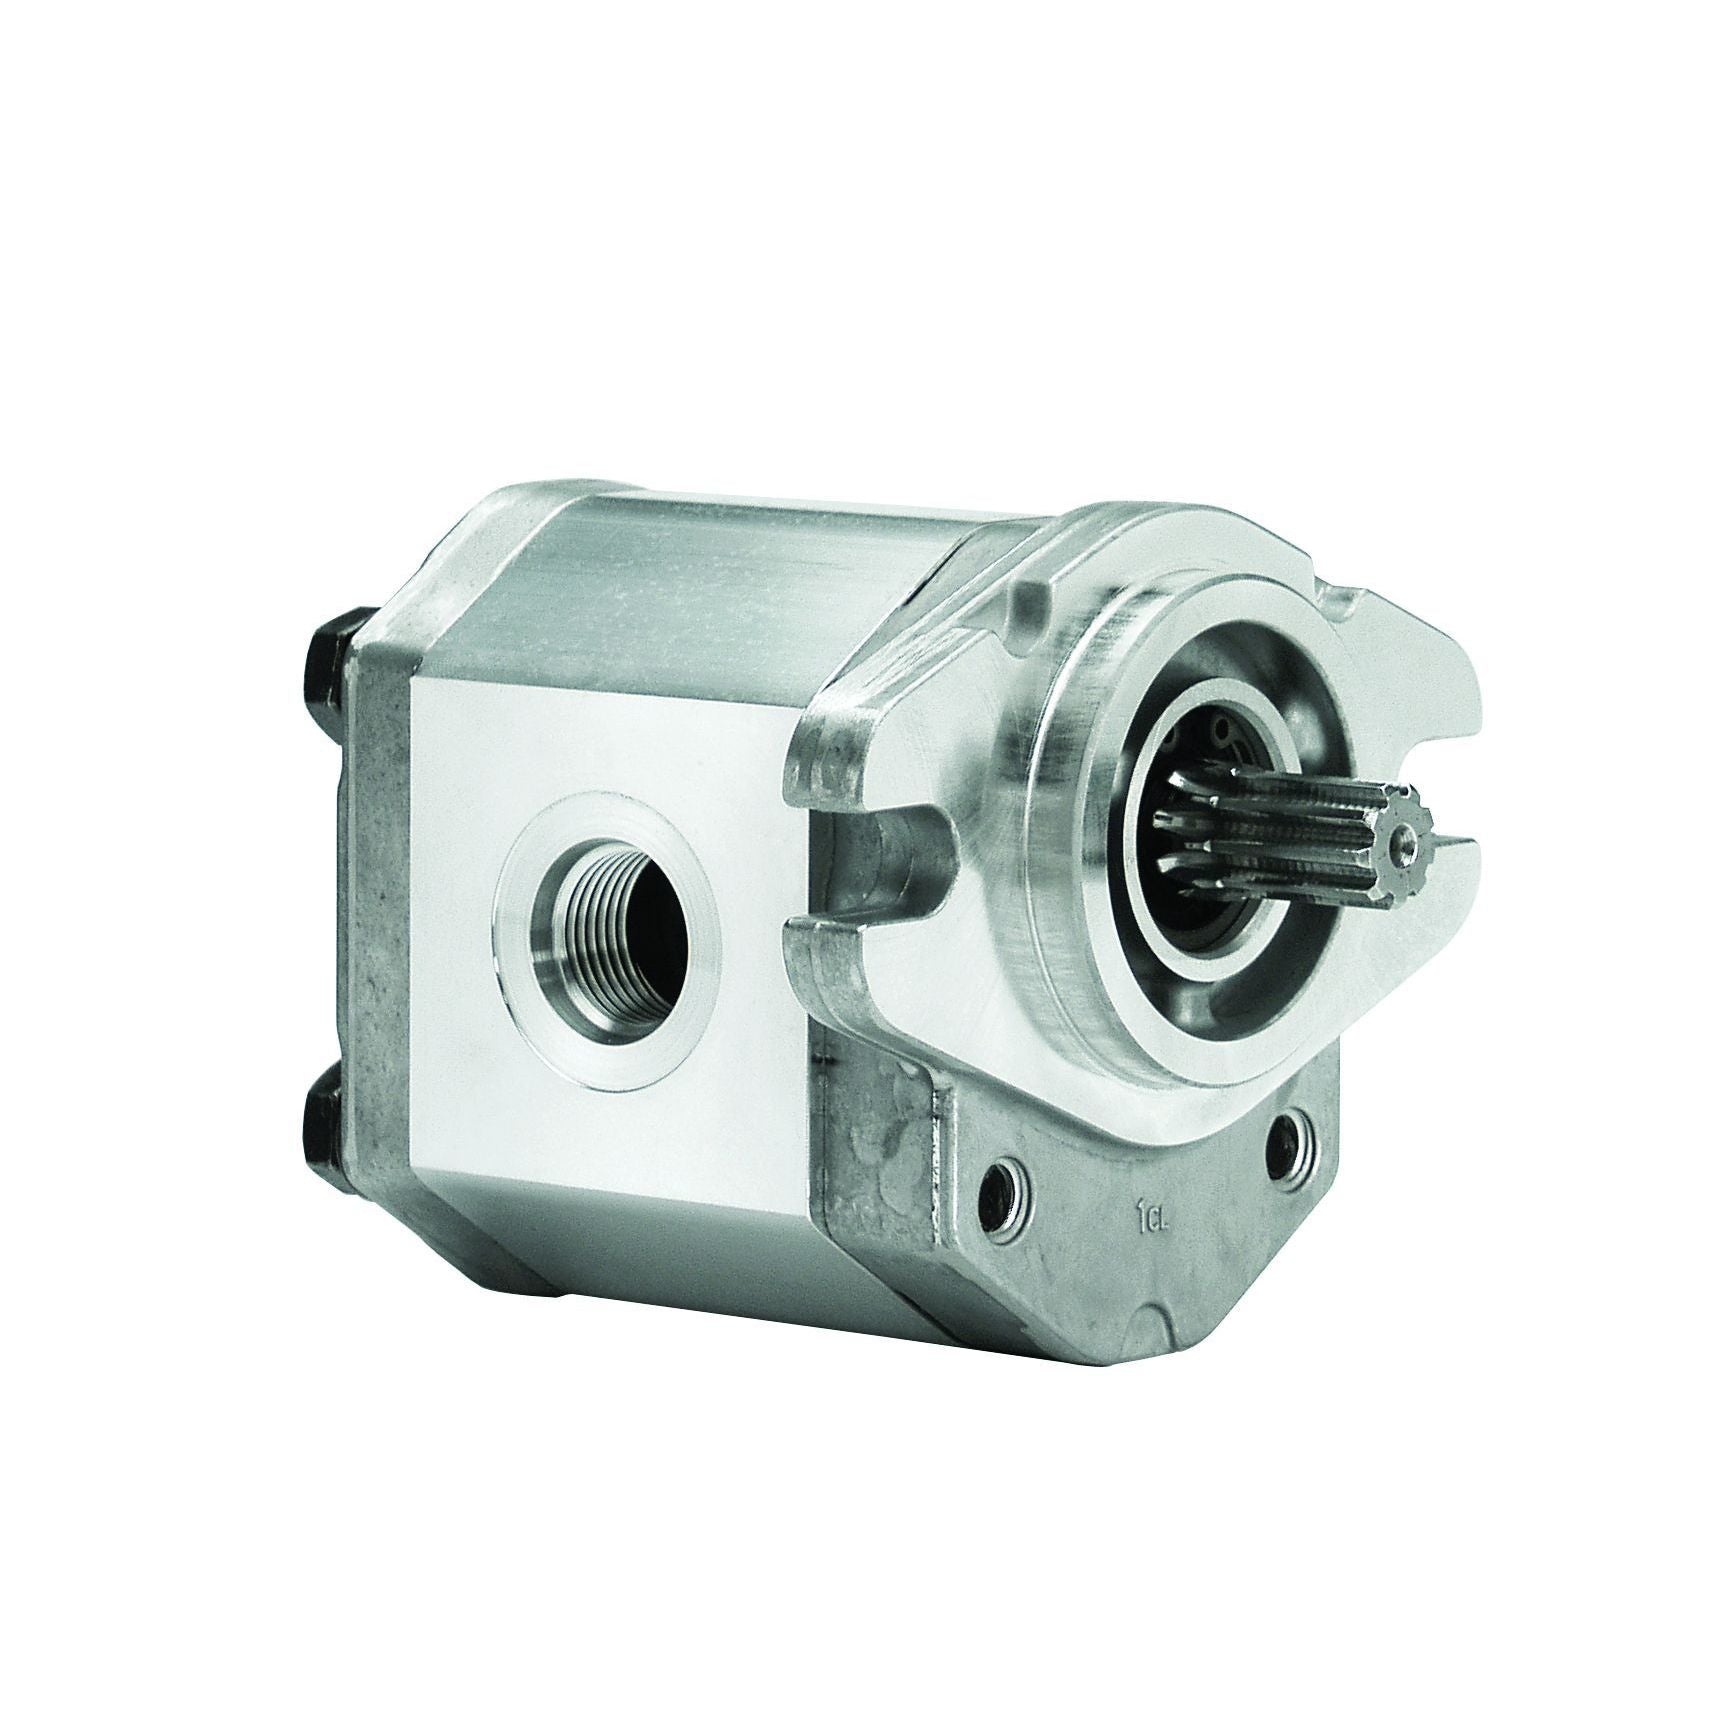 ALP2A-D-9-S1 : Marzocchi Gear Pump, CW, 6.4cc (0.3904in3), 3.04 GPM, 3625psi, 4000 RPM, #12 SAE (3/4") In, #10 SAE (5/8") Out, Splined Shaft 9T 16/32DP, SAE A 2-Bolt Mount